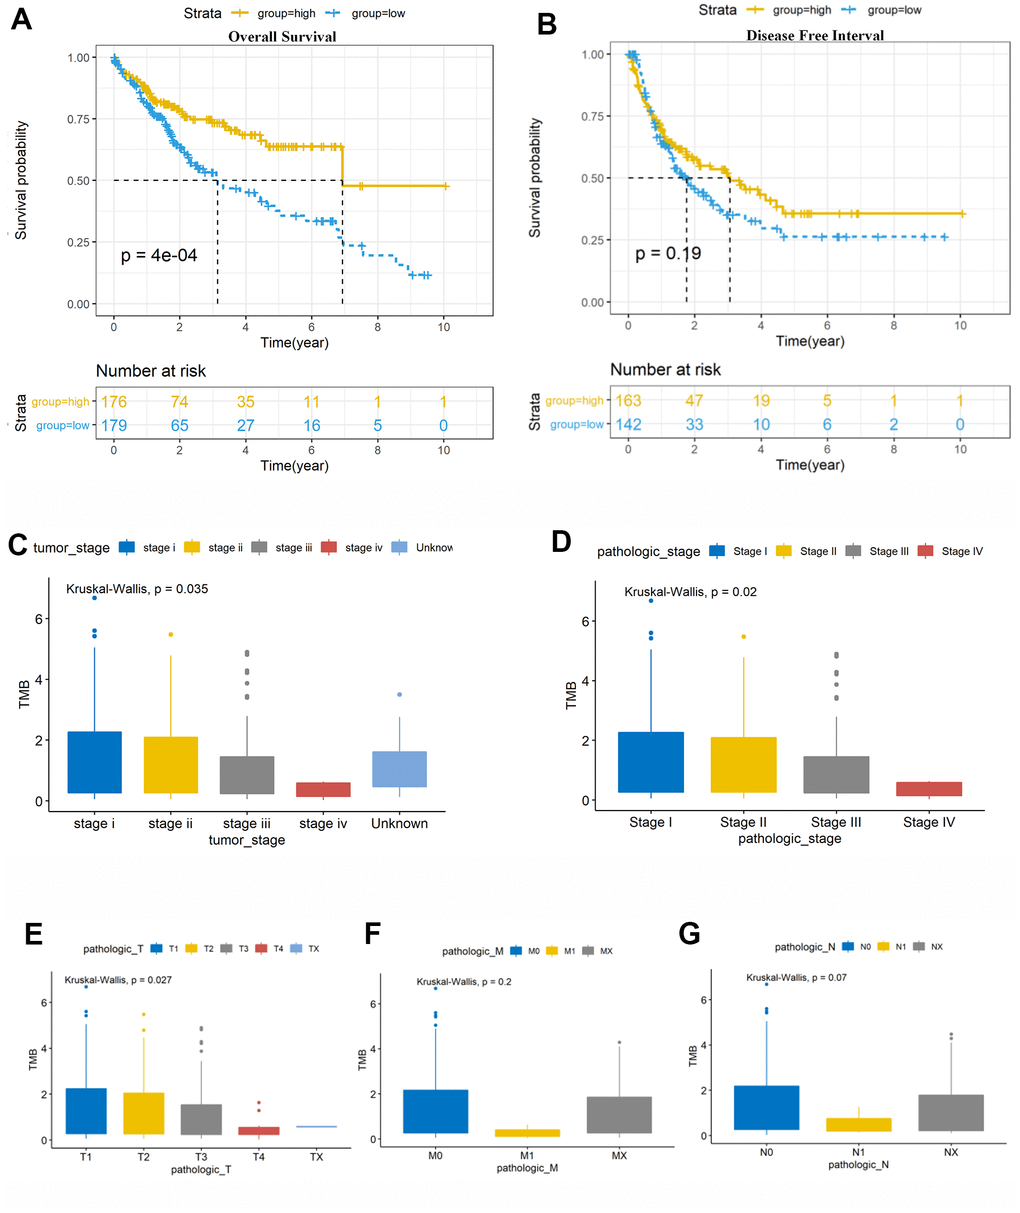 6Prognosis analysis of tumor mutation burden (TMB) and correlation analysis with clinical risk features. (A) Patients with higher TMB had better overall survival (OS, P = 0.0014). (B) There was no association of TMB with disease-free survival (DFS, P = 0.51). (C, D) High TMB level was negatively correlated with tumor stage and pathological stage, with P = 0.035 and 0.02, respectively. Vertical and horizontal axes represent TMB value and different stages, respectively. (E–G) Significant difference was observed in the AJCC-T stages (P = 0.027), while no significant differences were observed in the AJCC-N and AJCC-M stages (P > 0.05). TMB, tumor mutation burden. Vertical and horizontal axes represent TMB value and different stages, respectively. TMB, tumor mutation burden; OS, overall survival; DFI, disease-free interval.